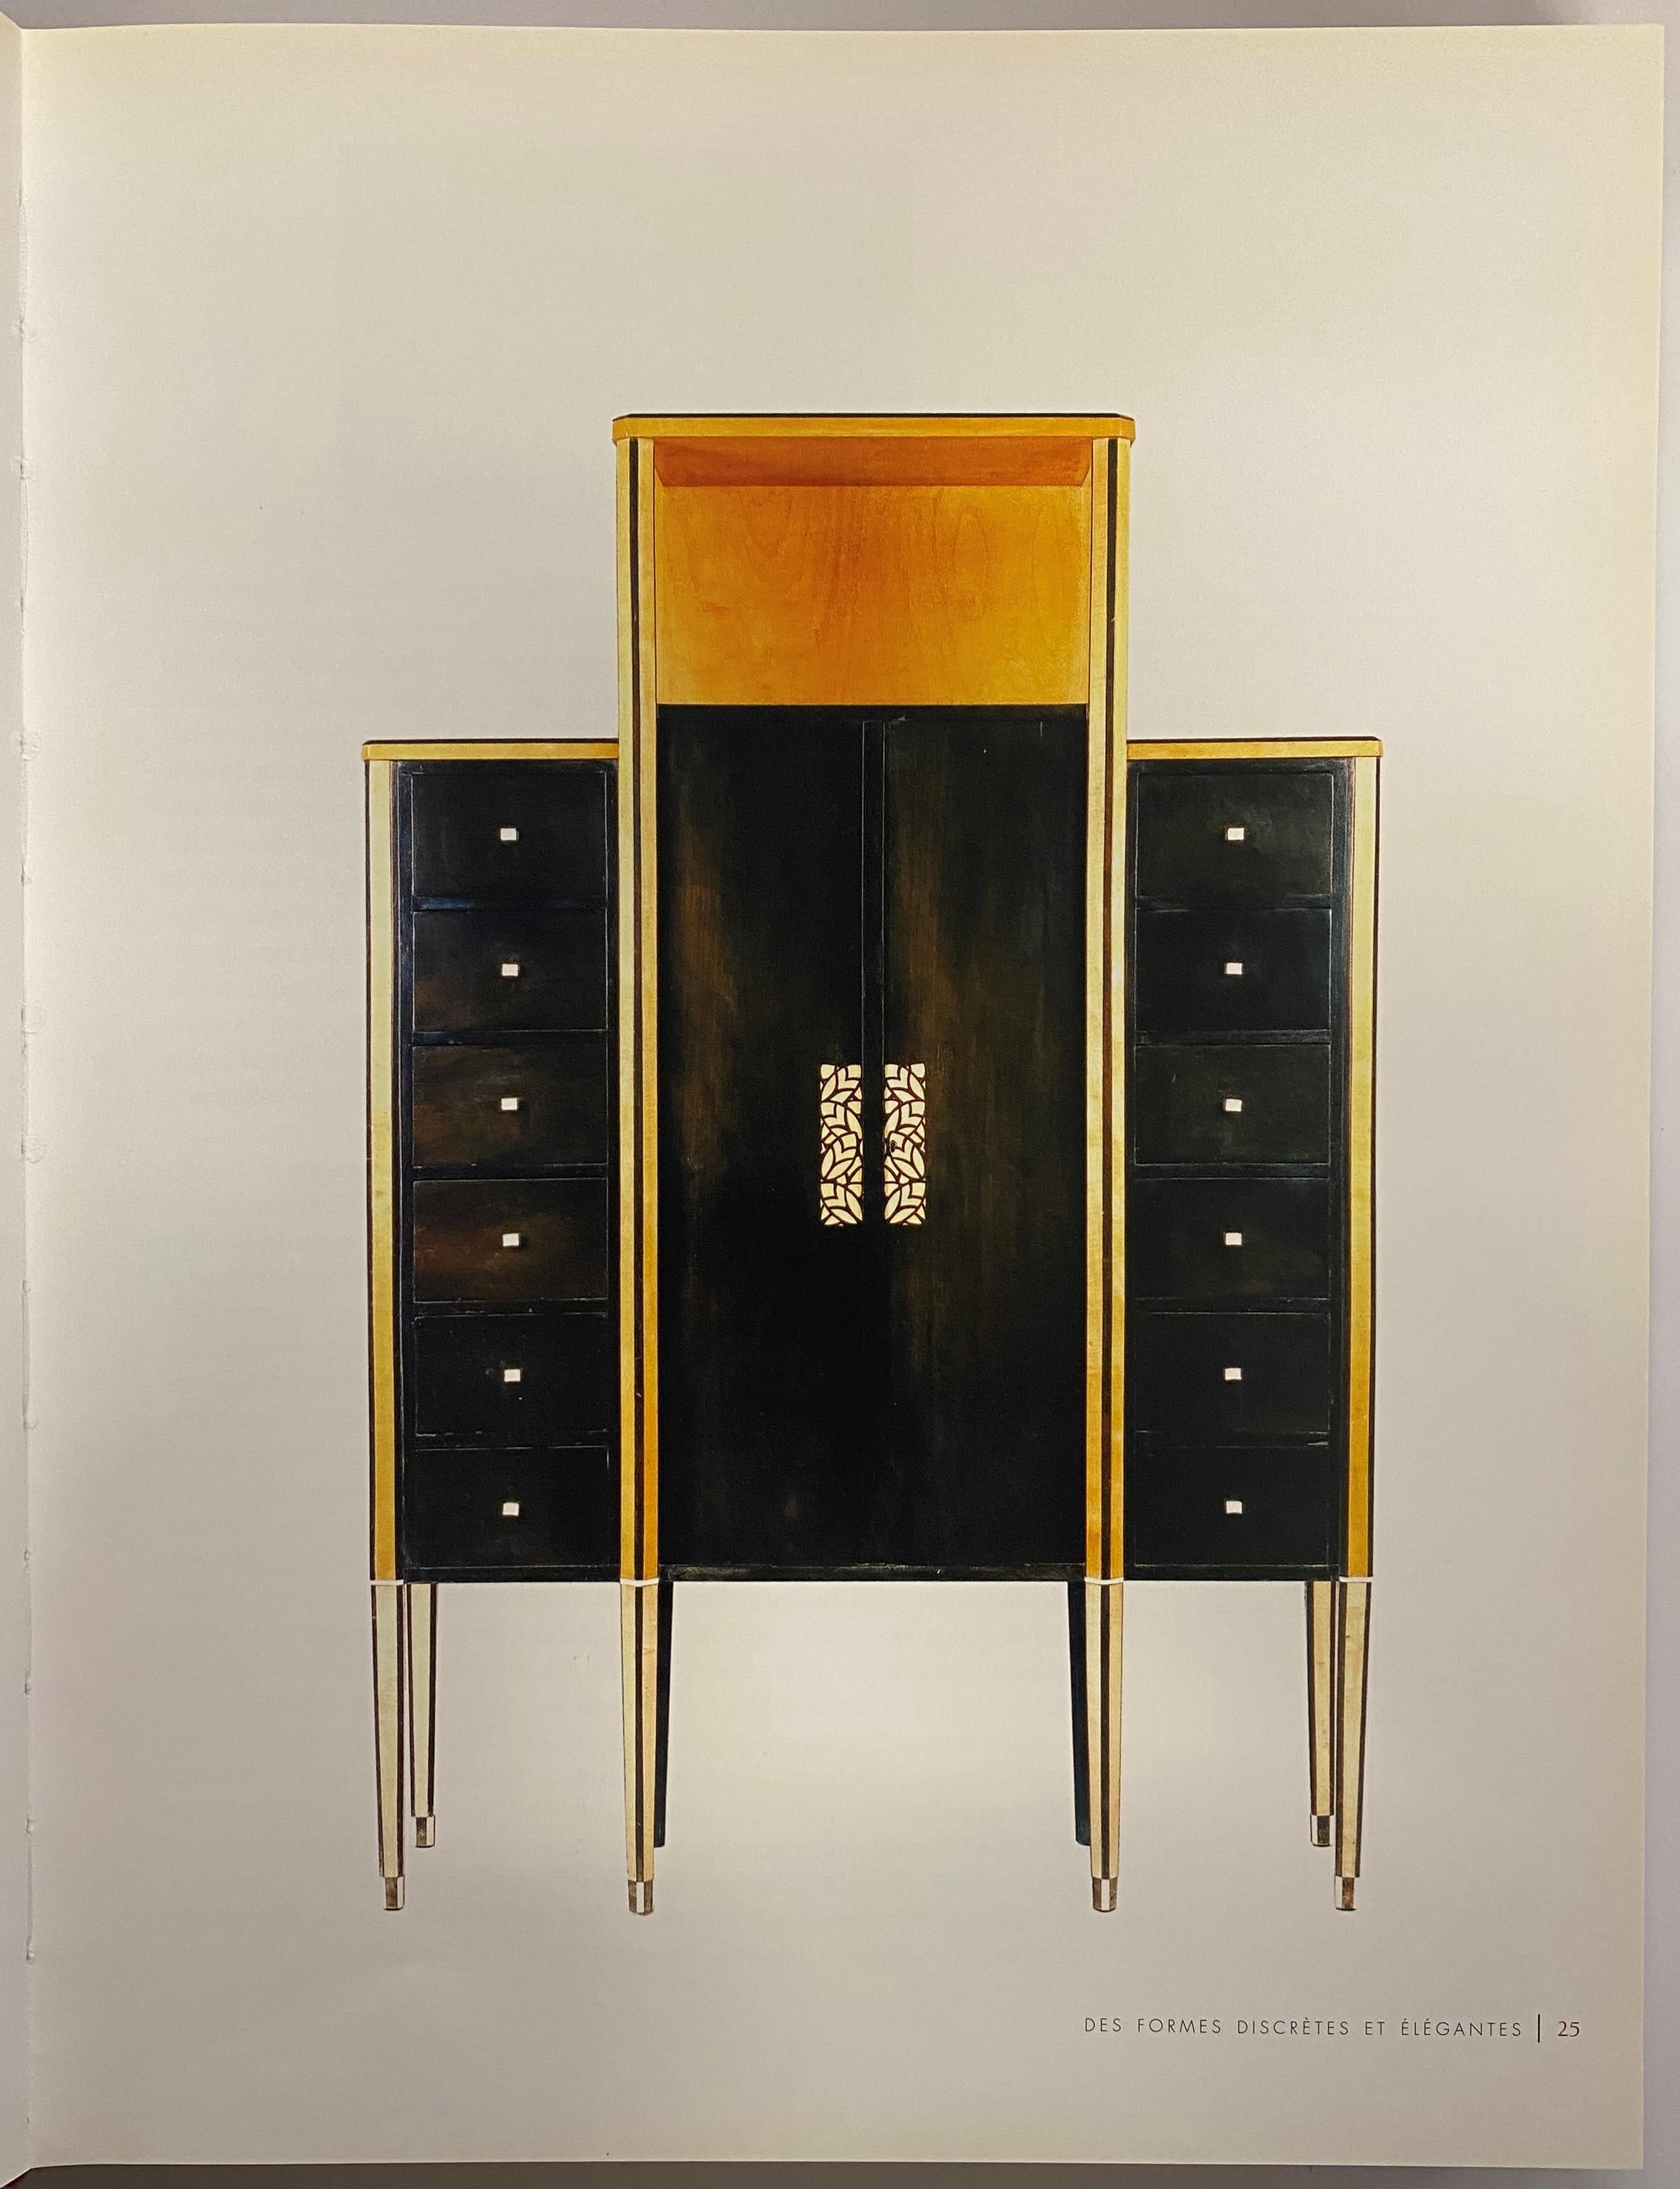 This monograph about the house of Dominique which became a household name best known for beautiful modern furniture, is actually about the two men who collaborated together under that name from 1920 - Andre Domin (1883-1962) and Marcel Geneviève